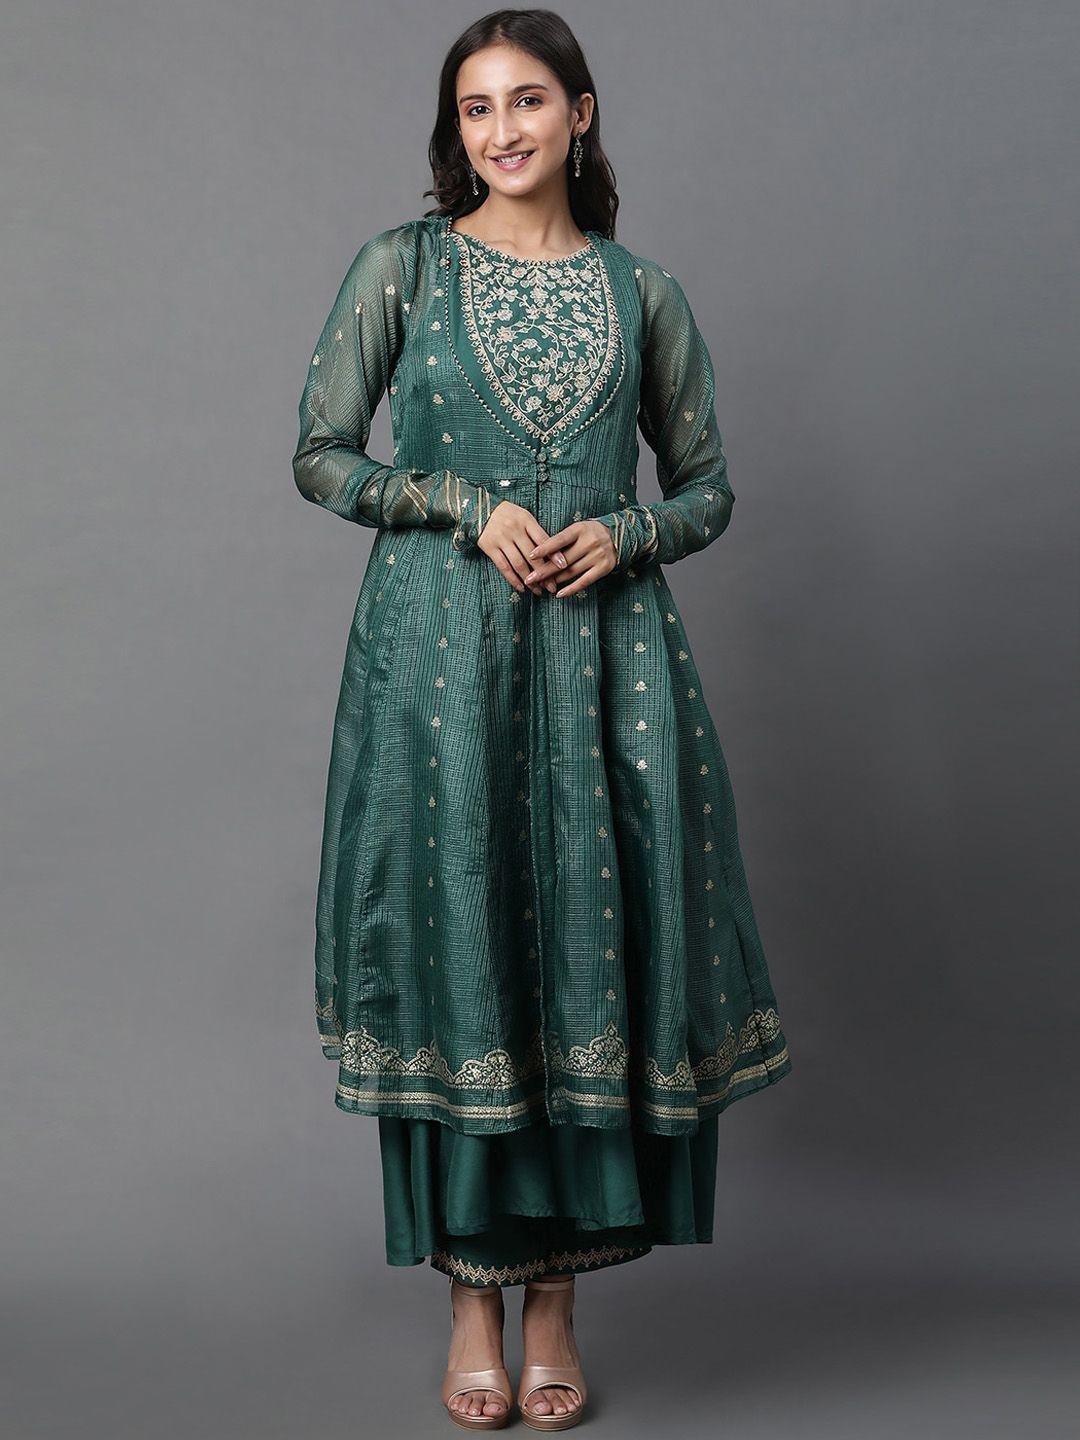 w floral embroidered anarkali thread work kurta with trousers